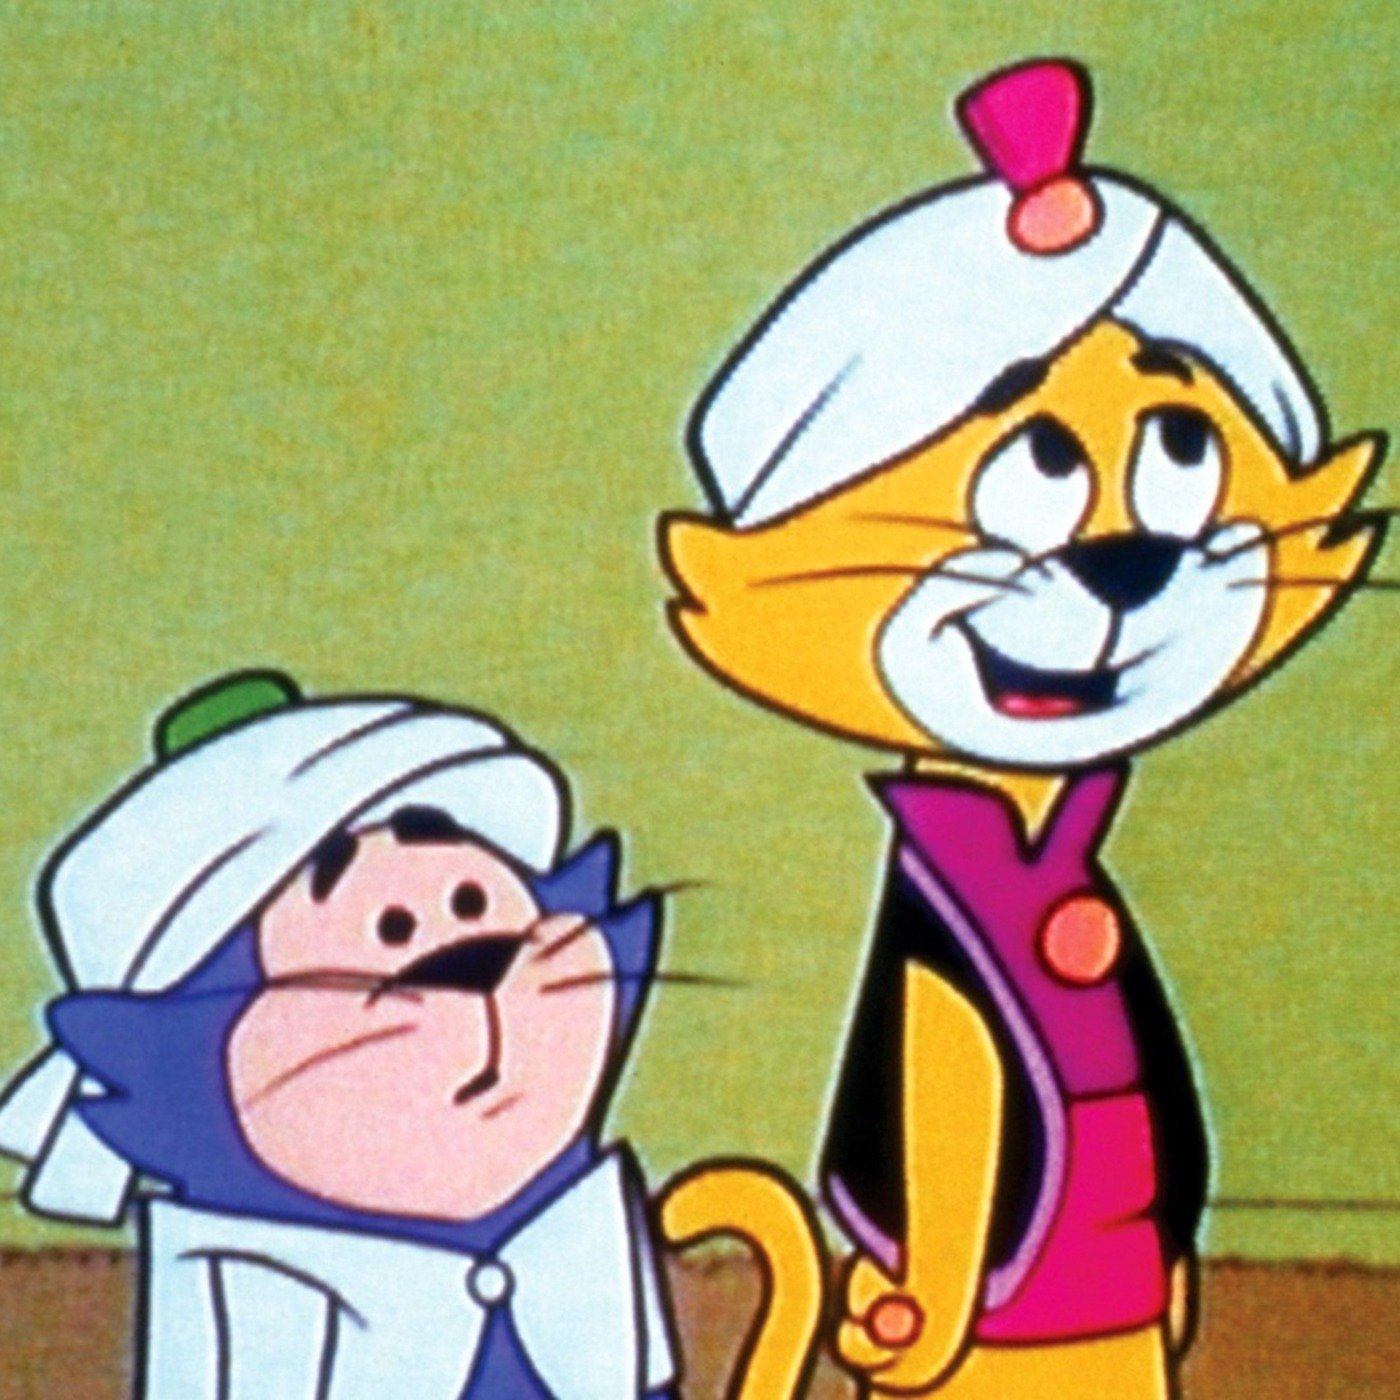 The Best 60s Cartoons & Animated Shows From The 1960s